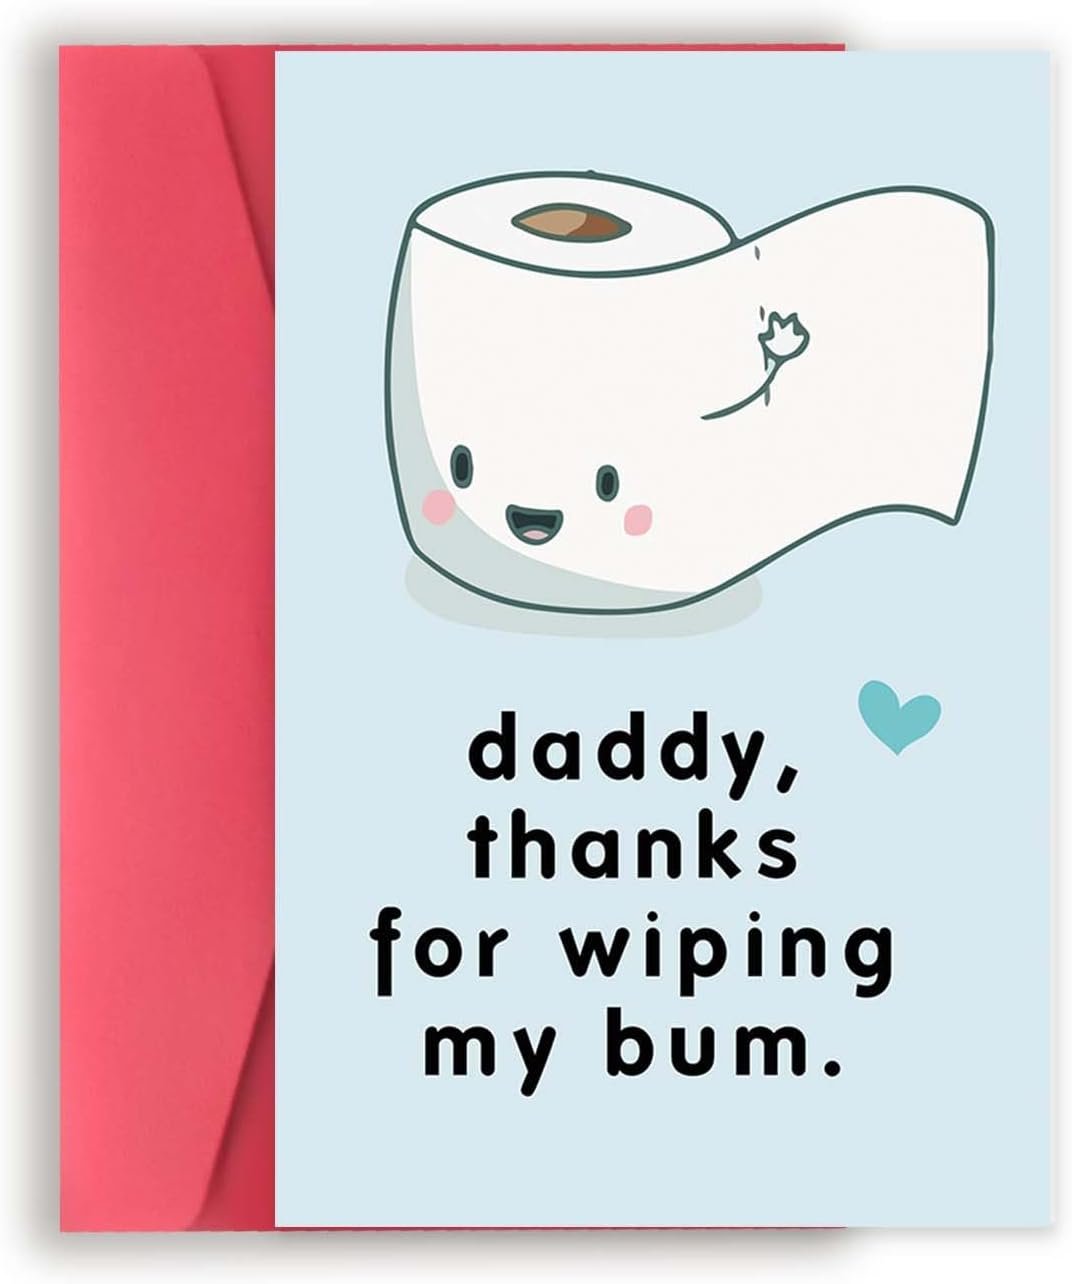 Zyulin Sweet Fathers Day Cards Gifts for Boyfriend Husband, Happy Fathers Day Card Gift from Wife Girlfriend, Wonderful Fathers Day Card to My Favorite Father, Love Card